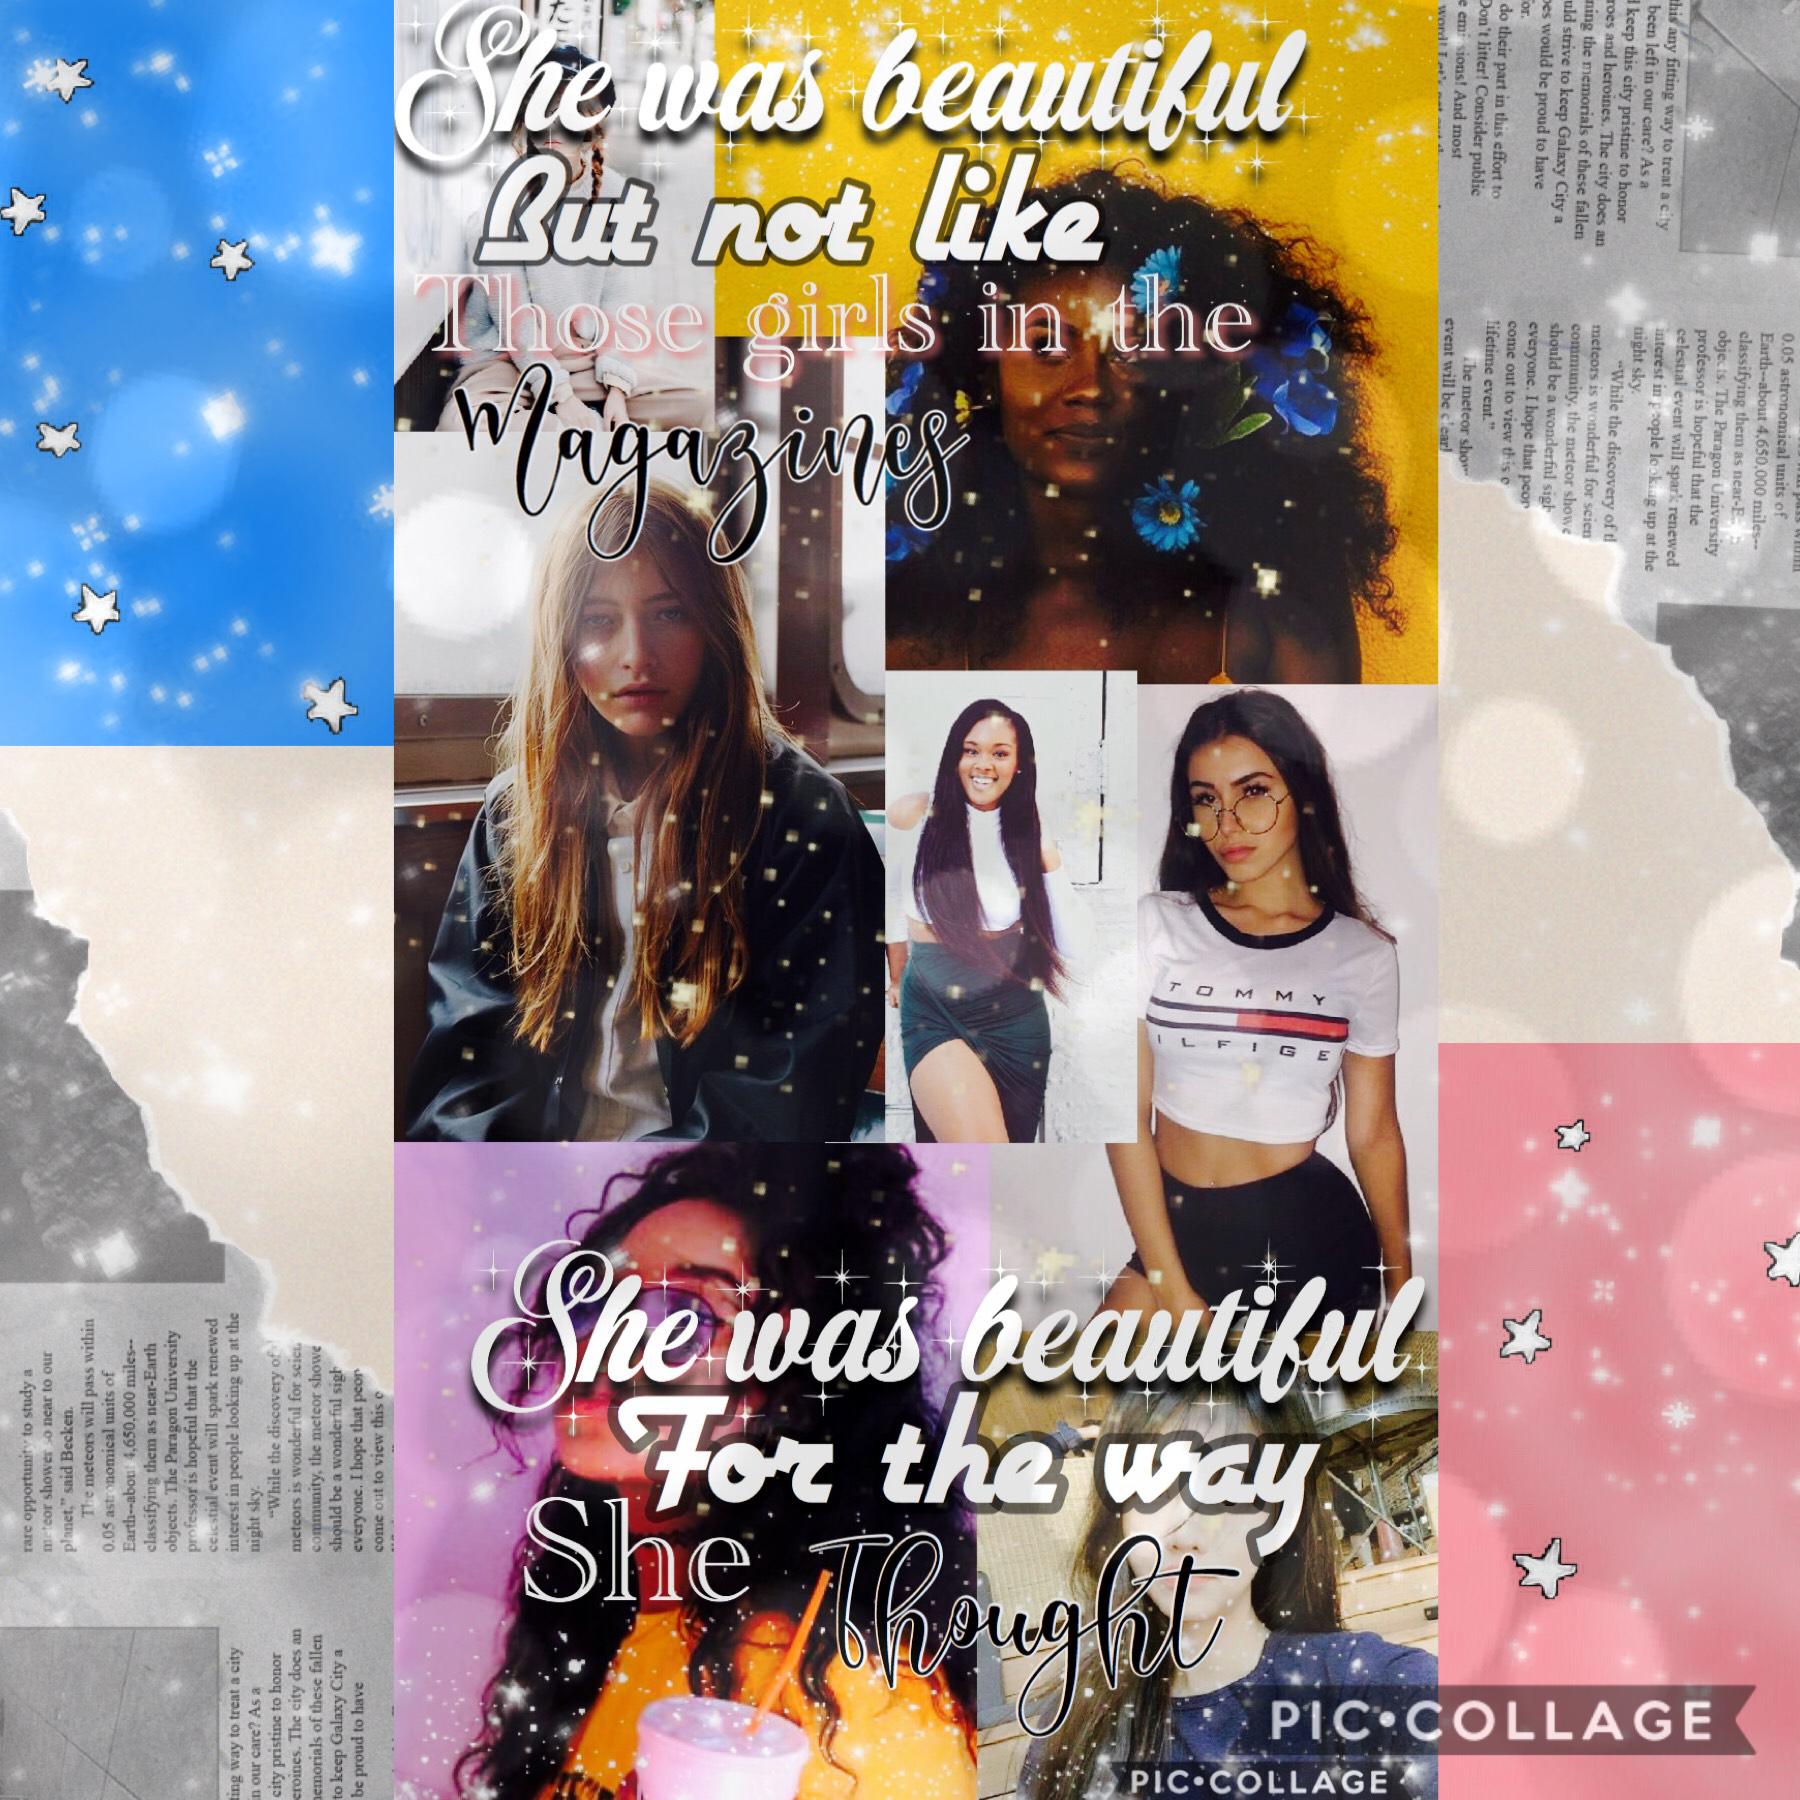 Wouldn’t let me post before so I had to do it with this layout... o well maybe a new style🤨🤩❤️